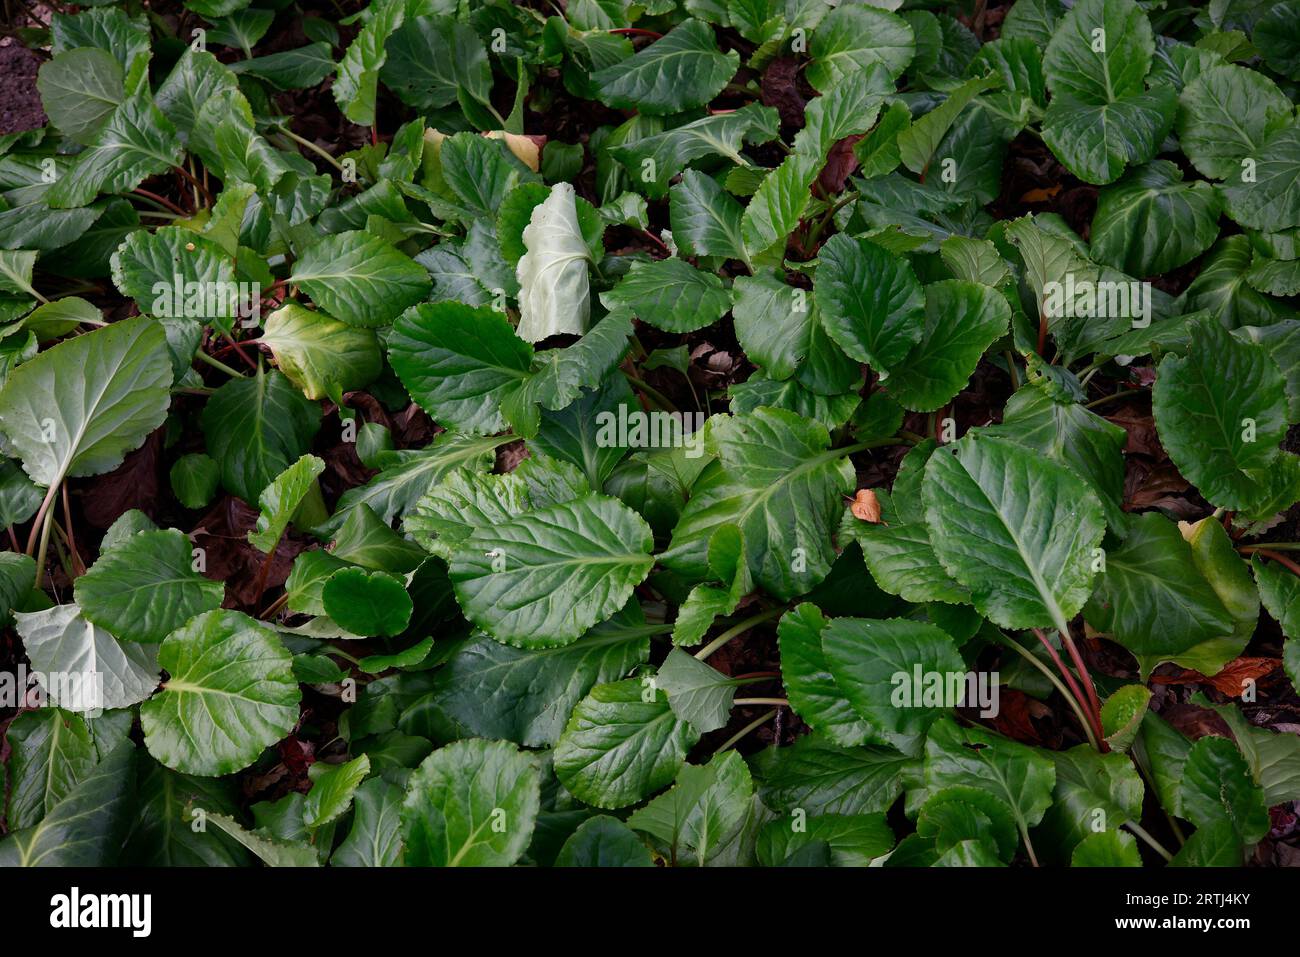 Closeup overhead view of the green summer leaves of the evergreen herbaceous perennial groundcover garden plant bergenia schneekissen. Stock Photo